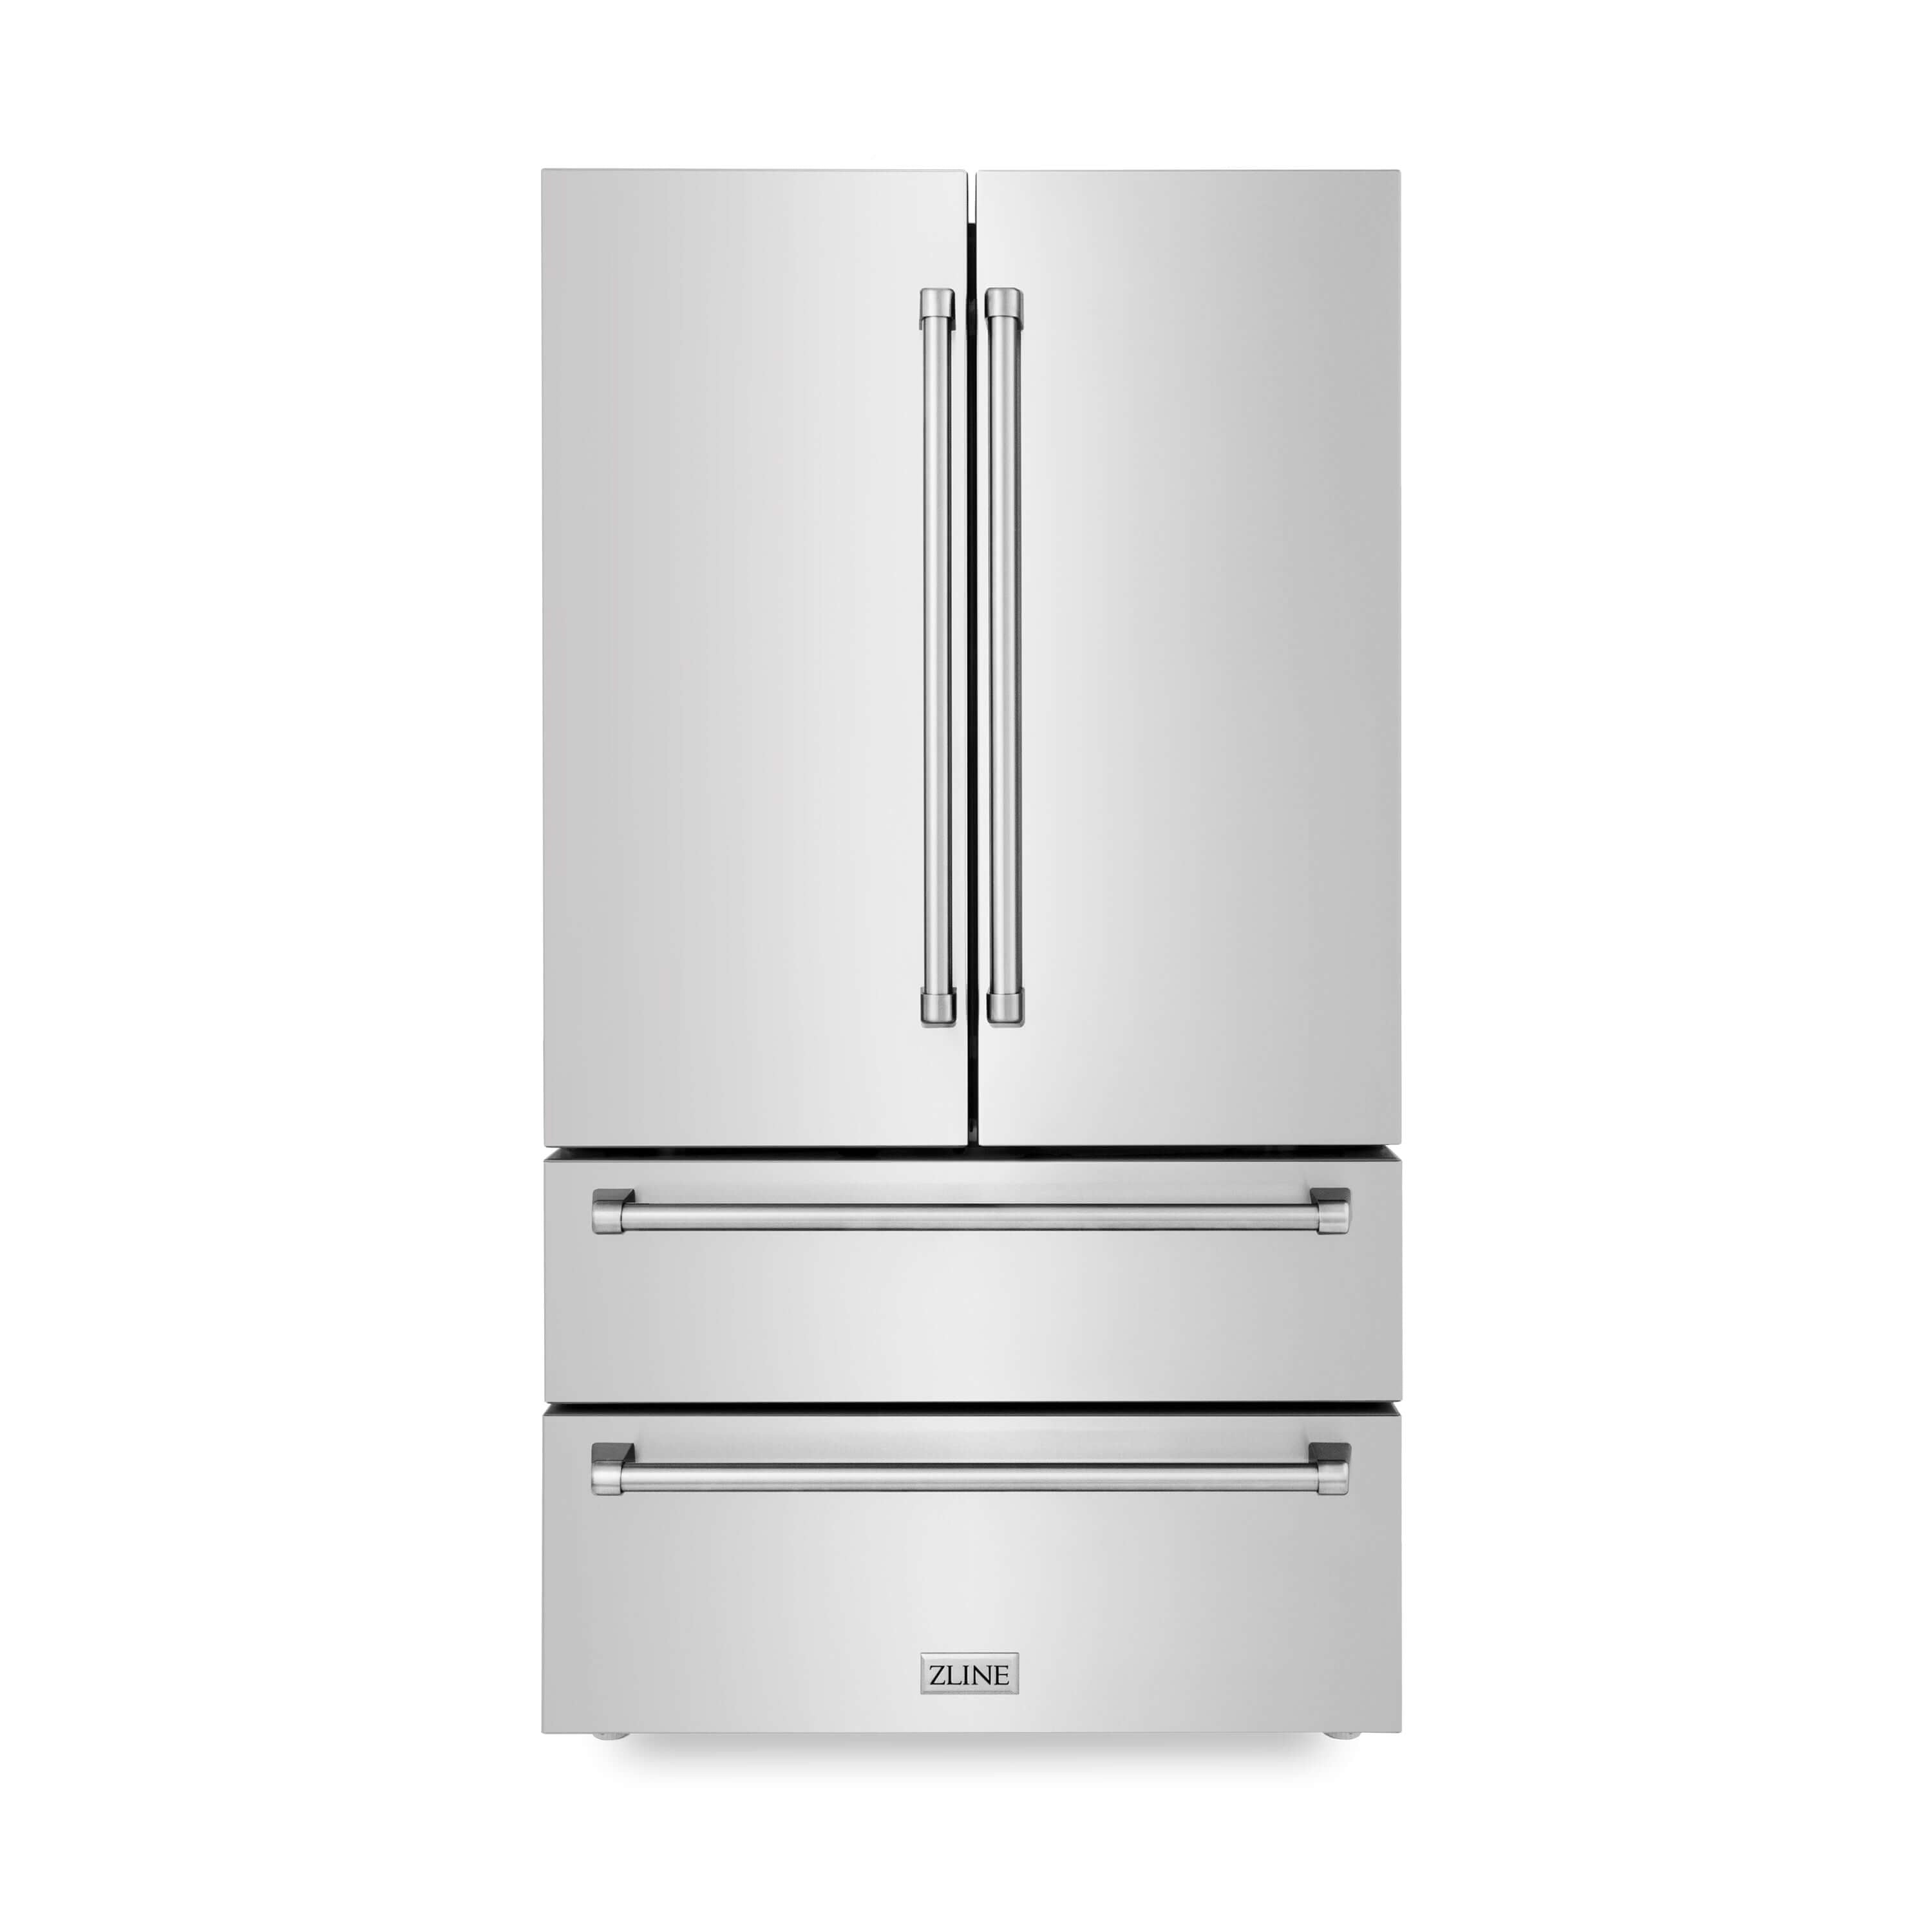 ZLINE Kitchen Package in Stainless Steel with 36 in. French Door Refrigerator, 48 in. Dual Fuel Range, 48 in. Convertible Vent Range Hood, 24 in. Microwave Drawer, and 24 in. Tall Tub Dishwasher (5KPR-RARH48-MWDWV)